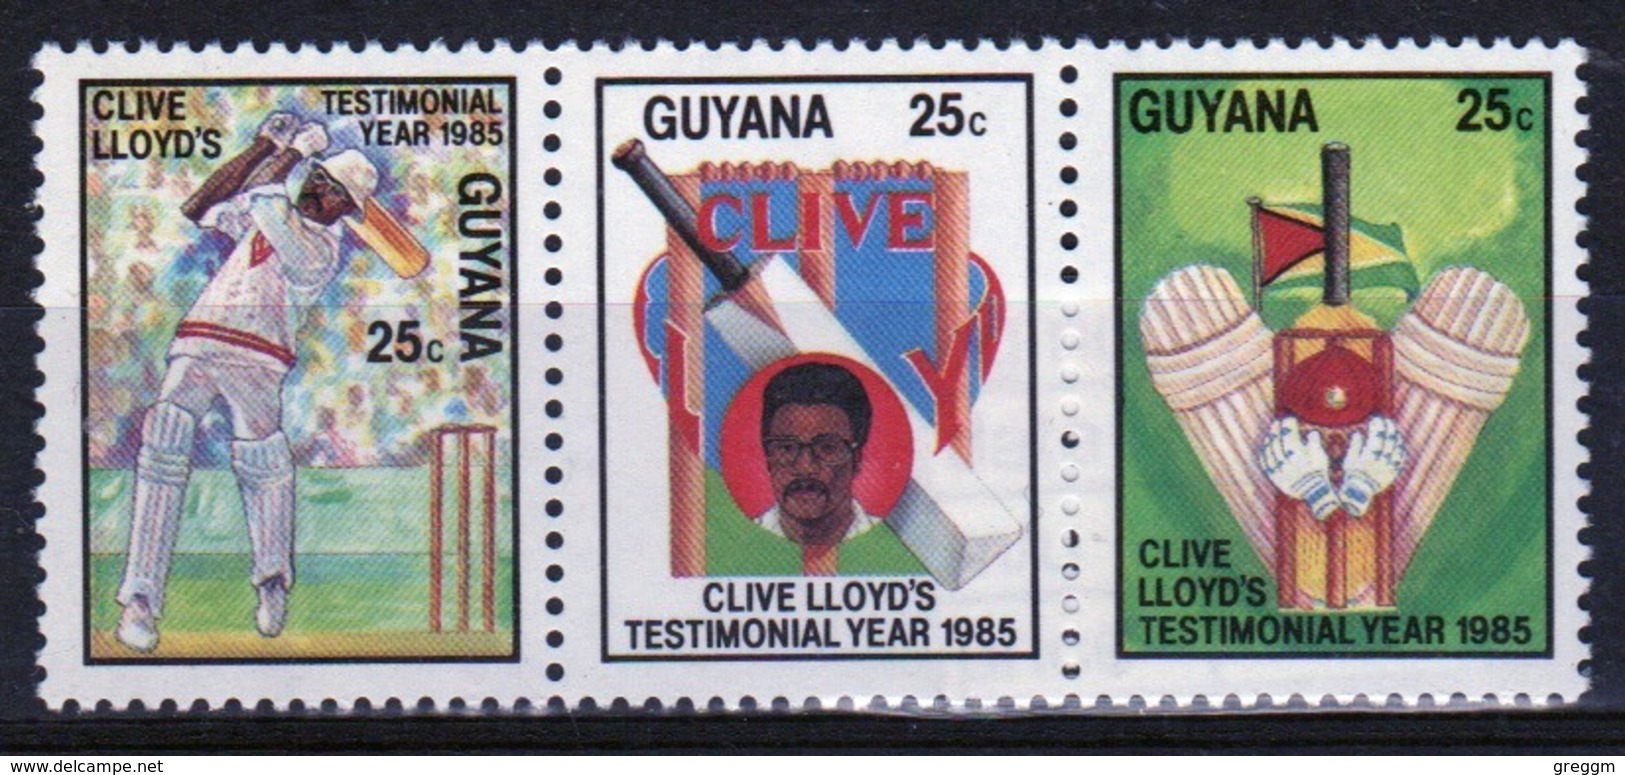 Guyana 1985 Strip Of Three 25c Stamps From The Cricket Clive Lloyds Testimonial Year. - Guyana (1966-...)